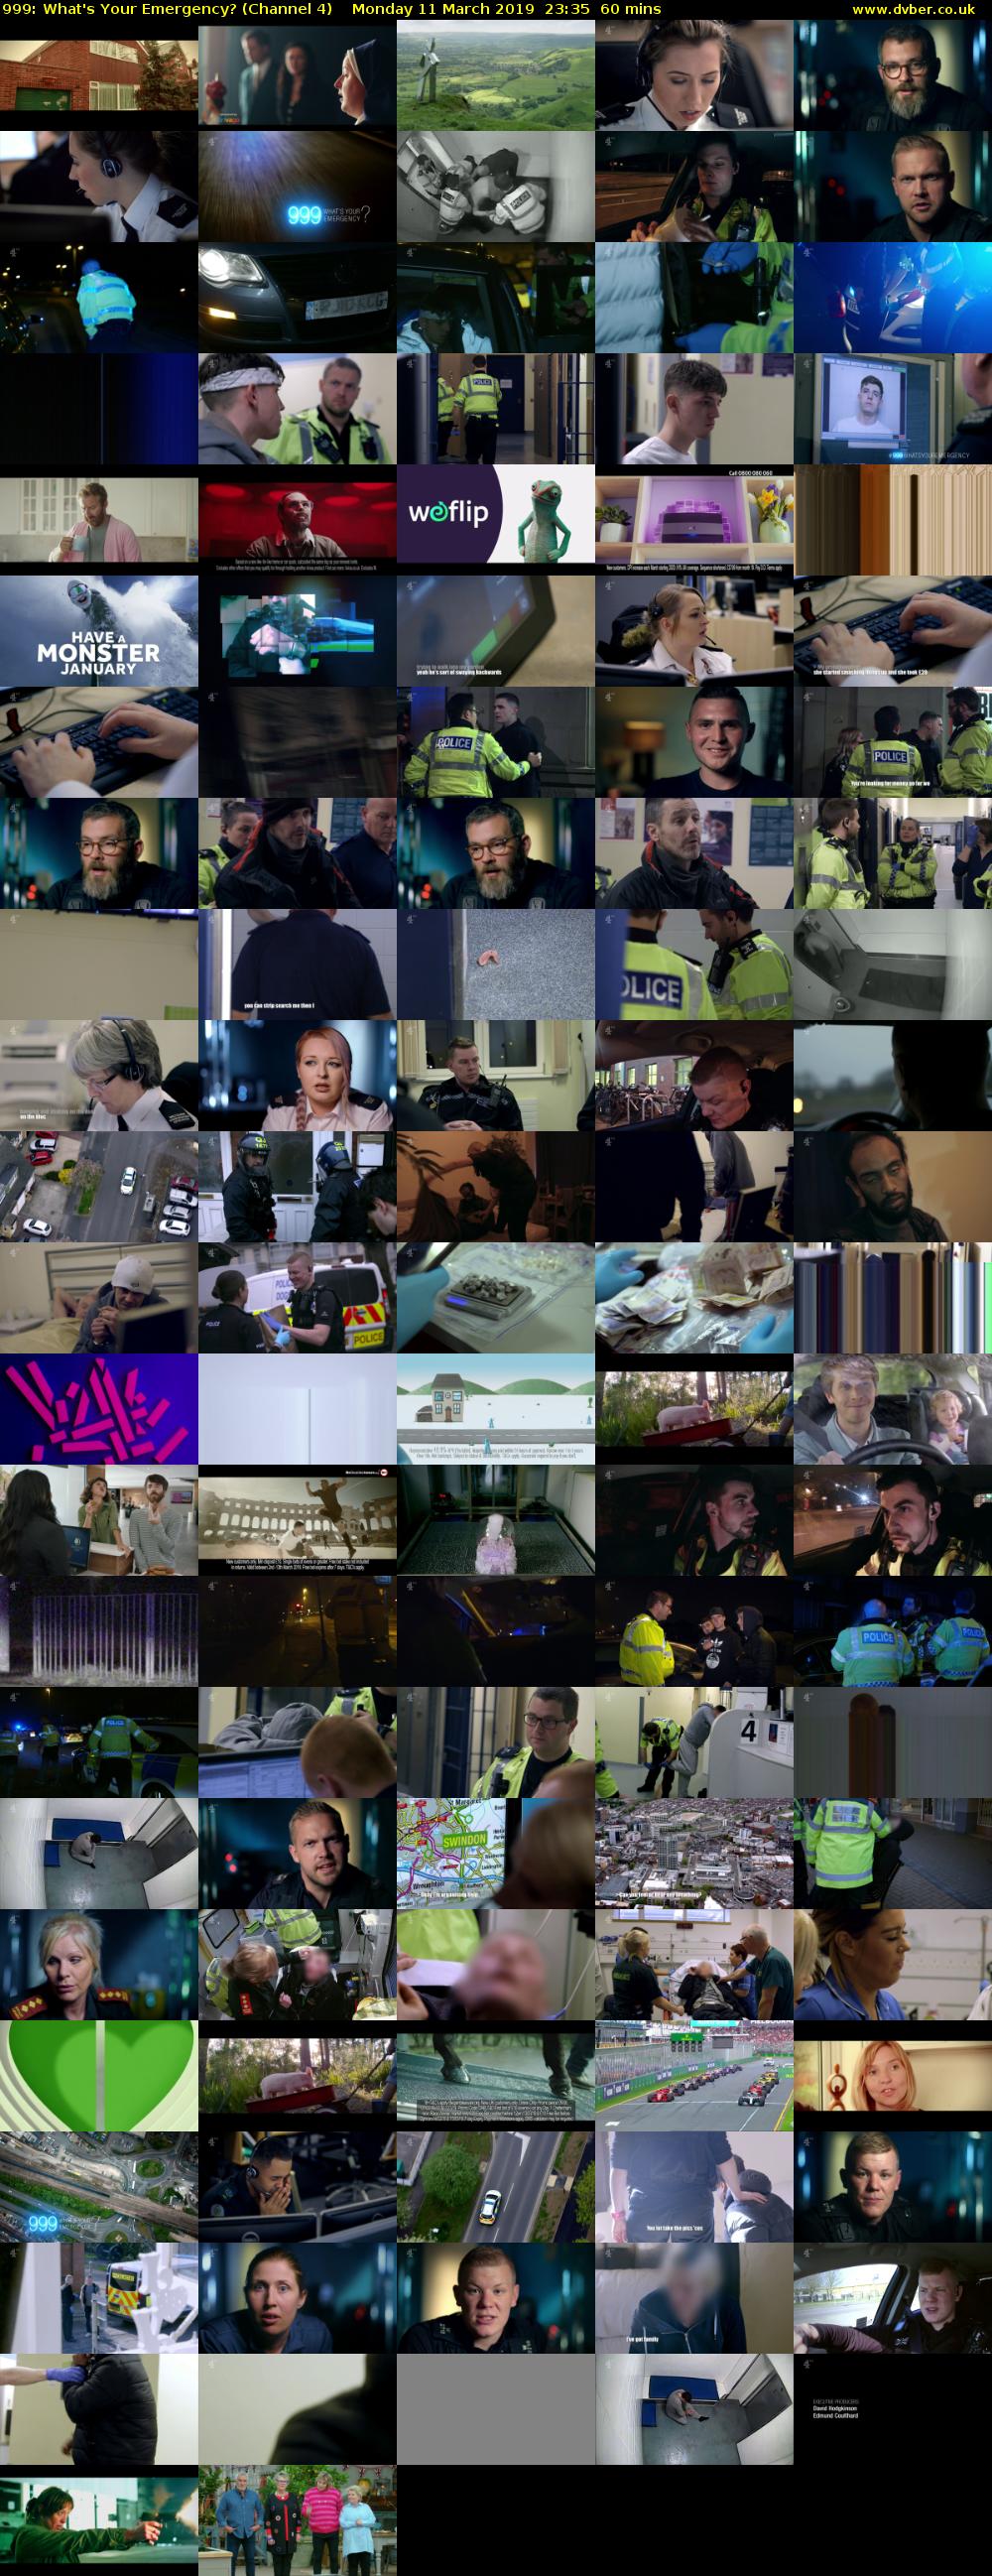 999: What's Your Emergency? (Channel 4) Monday 11 March 2019 23:35 - 00:35